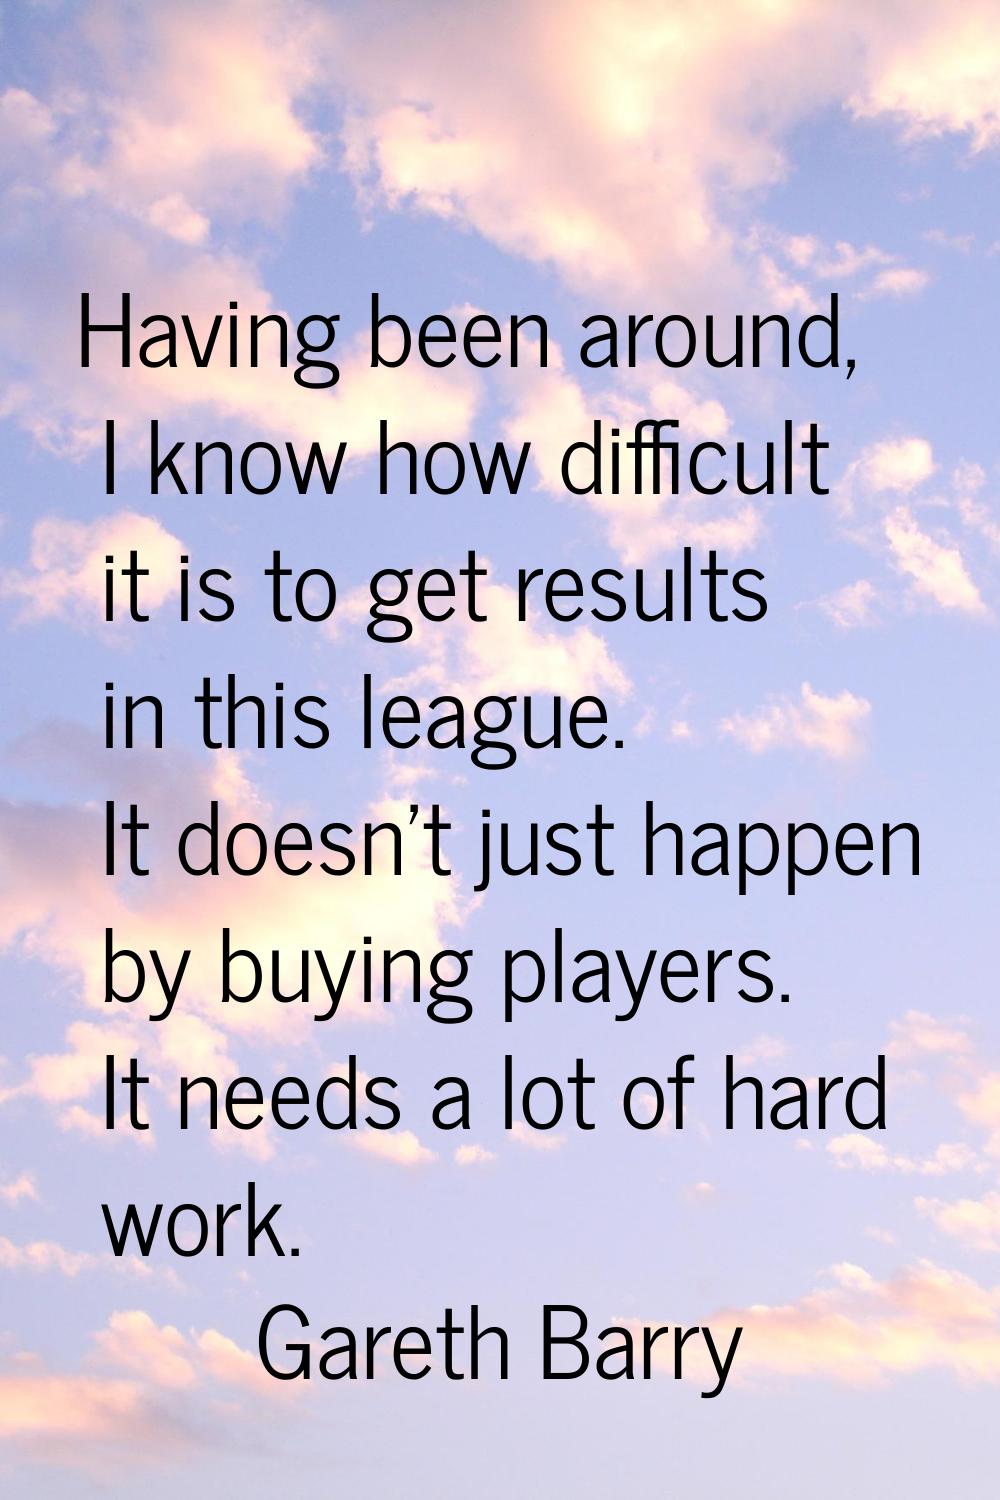 Having been around, I know how difficult it is to get results in this league. It doesn't just happe